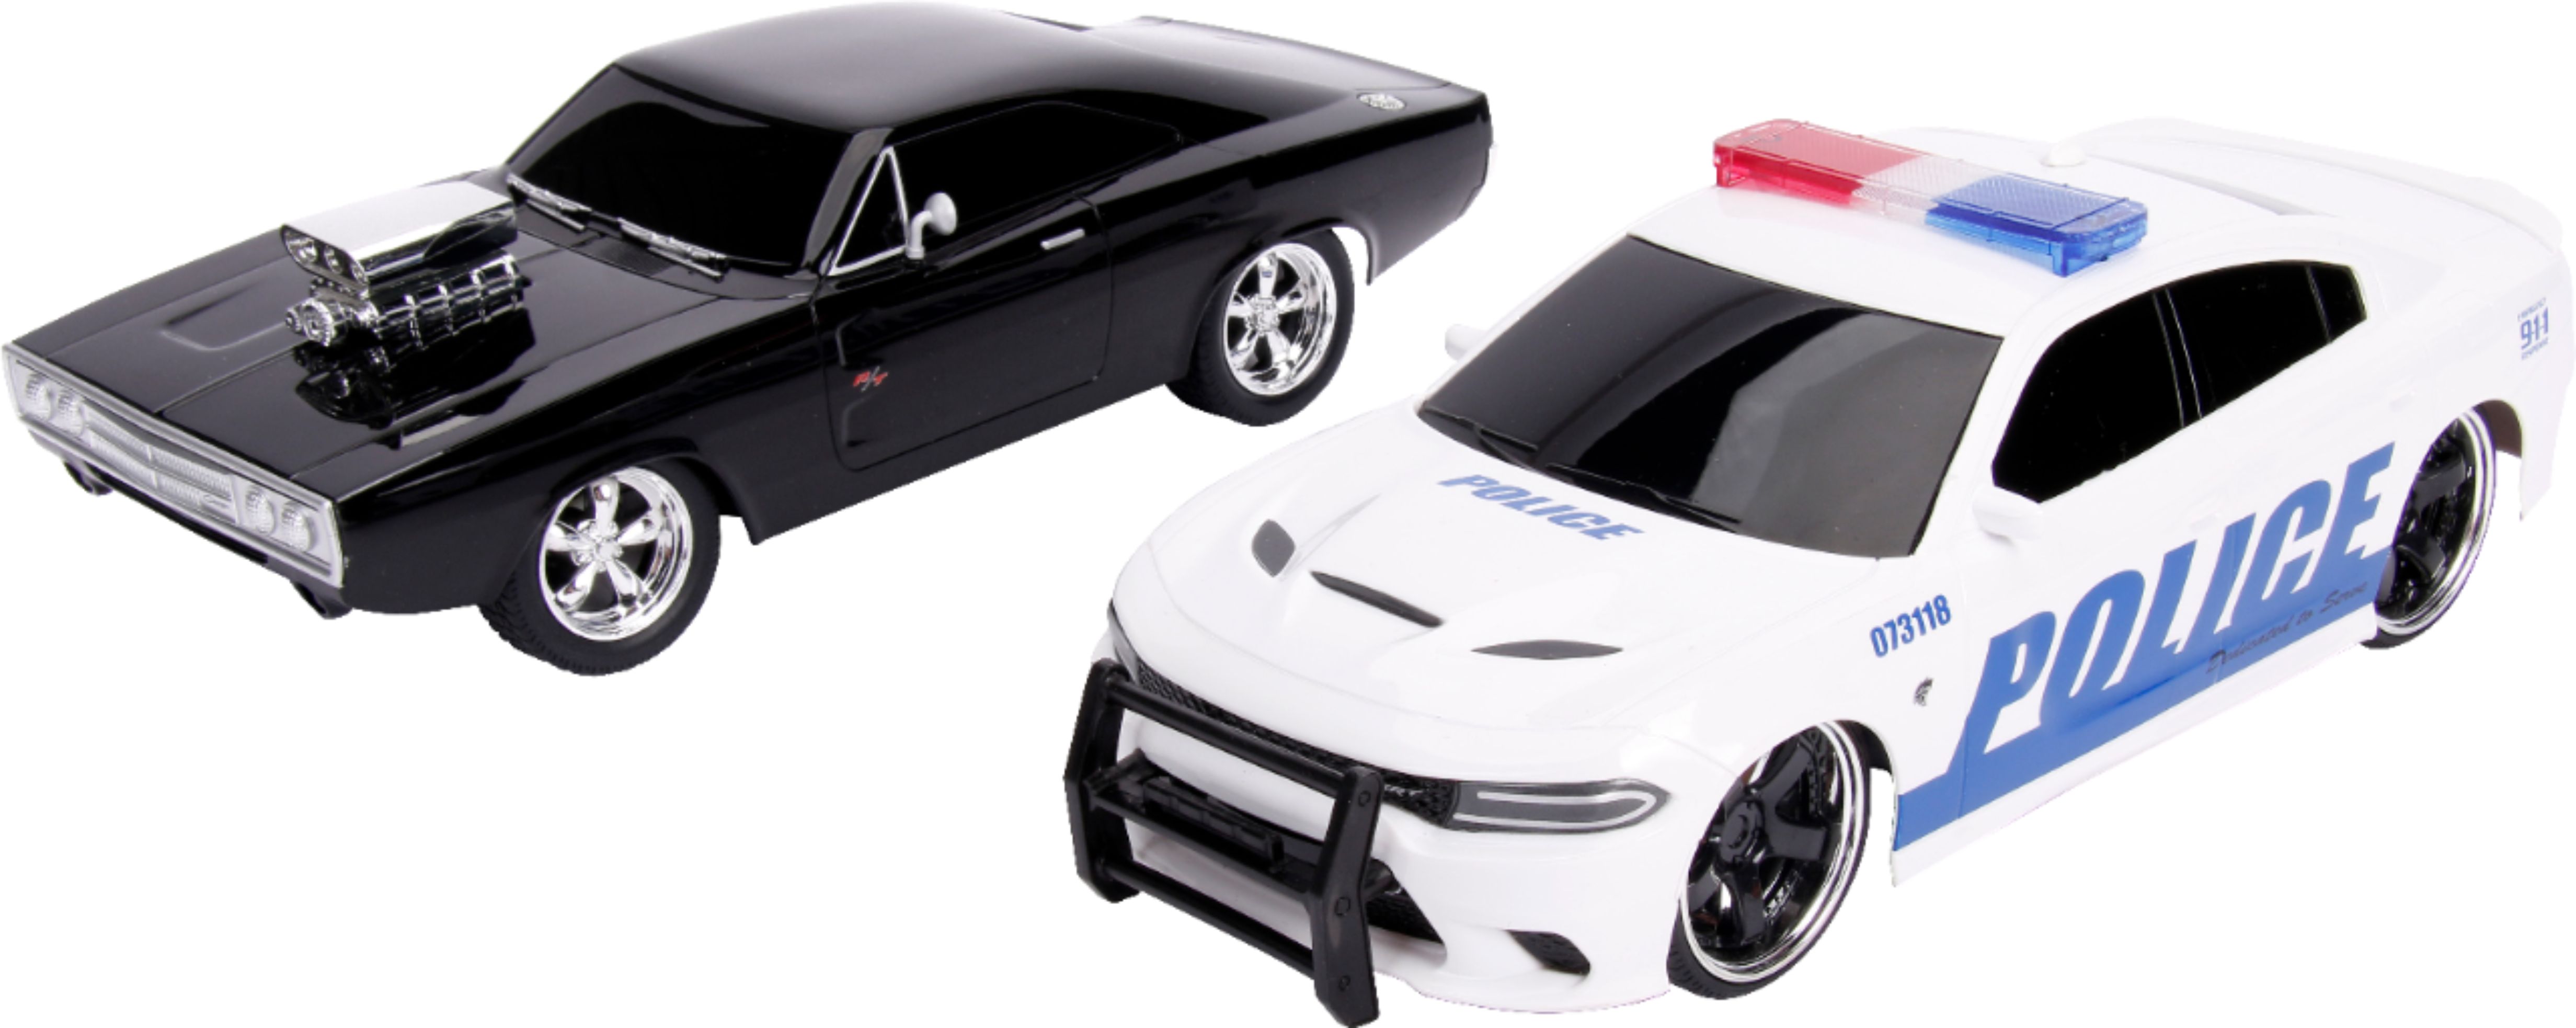 Fast and Furious - Chase Twin Pack: Dom's 1970 Dodge Charger vs 2015 Dodge Charger Police - Black/Blue/White/Red